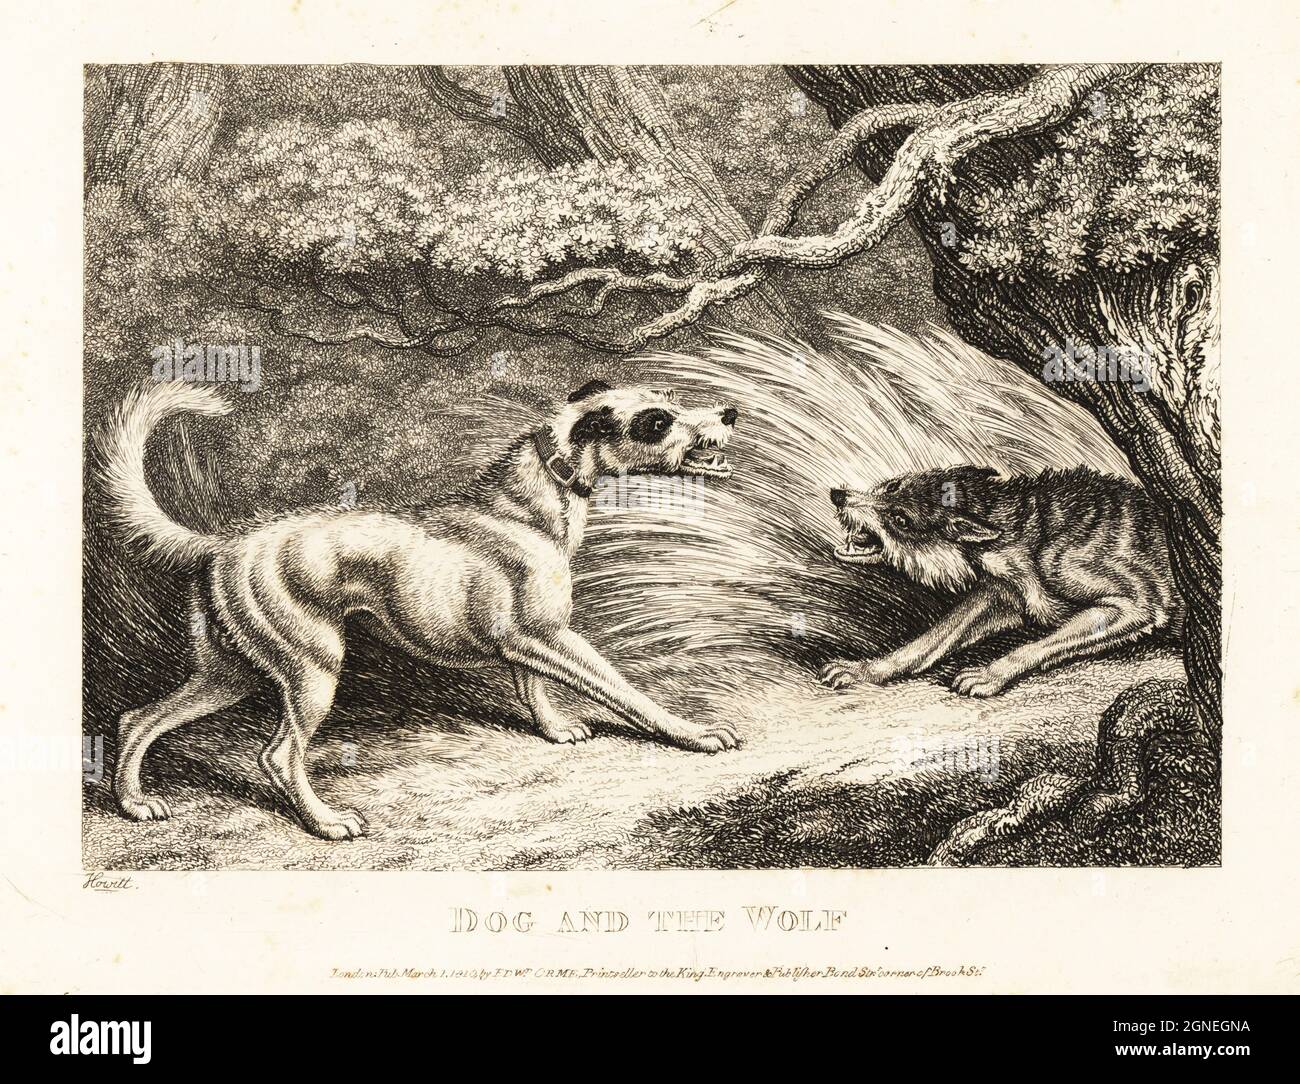 The Dog and the Wolf: A Retelling of Aesop's Fable